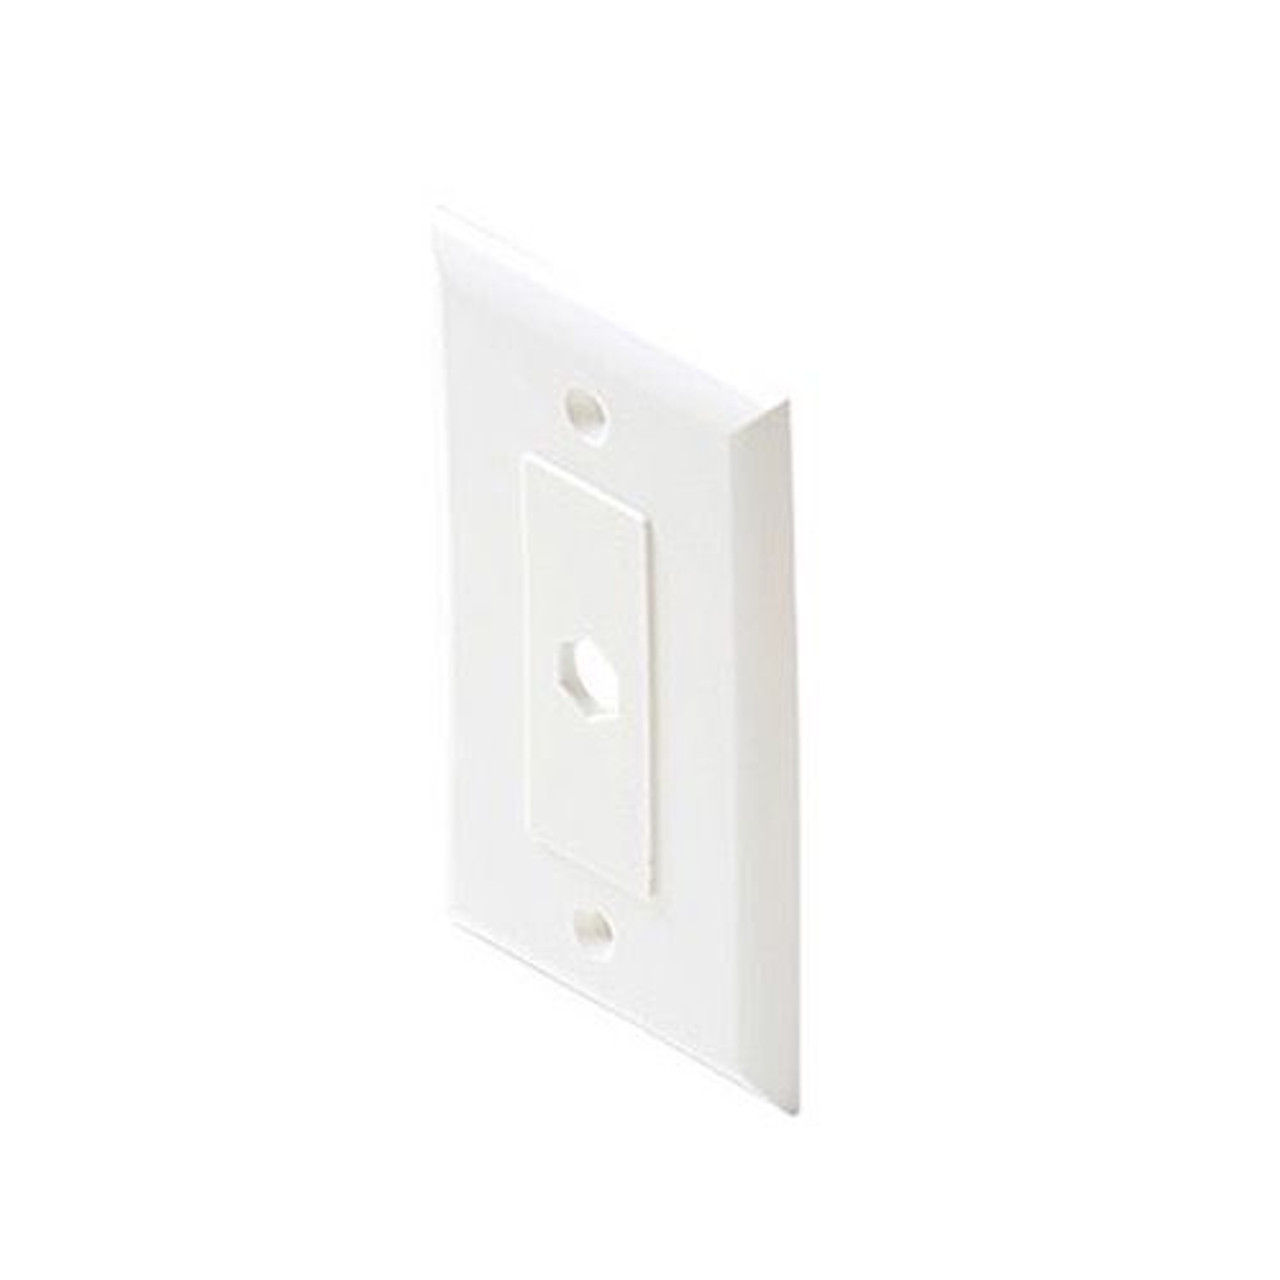 Steren 200-261WH Decorator Wall Plate White 1 Hole Single Piece Hex Insert Single Gang Coaxial Pass Through Connector Device Cable Hole 75 Ohm Plug Connector Nylon Flush Mount Cover